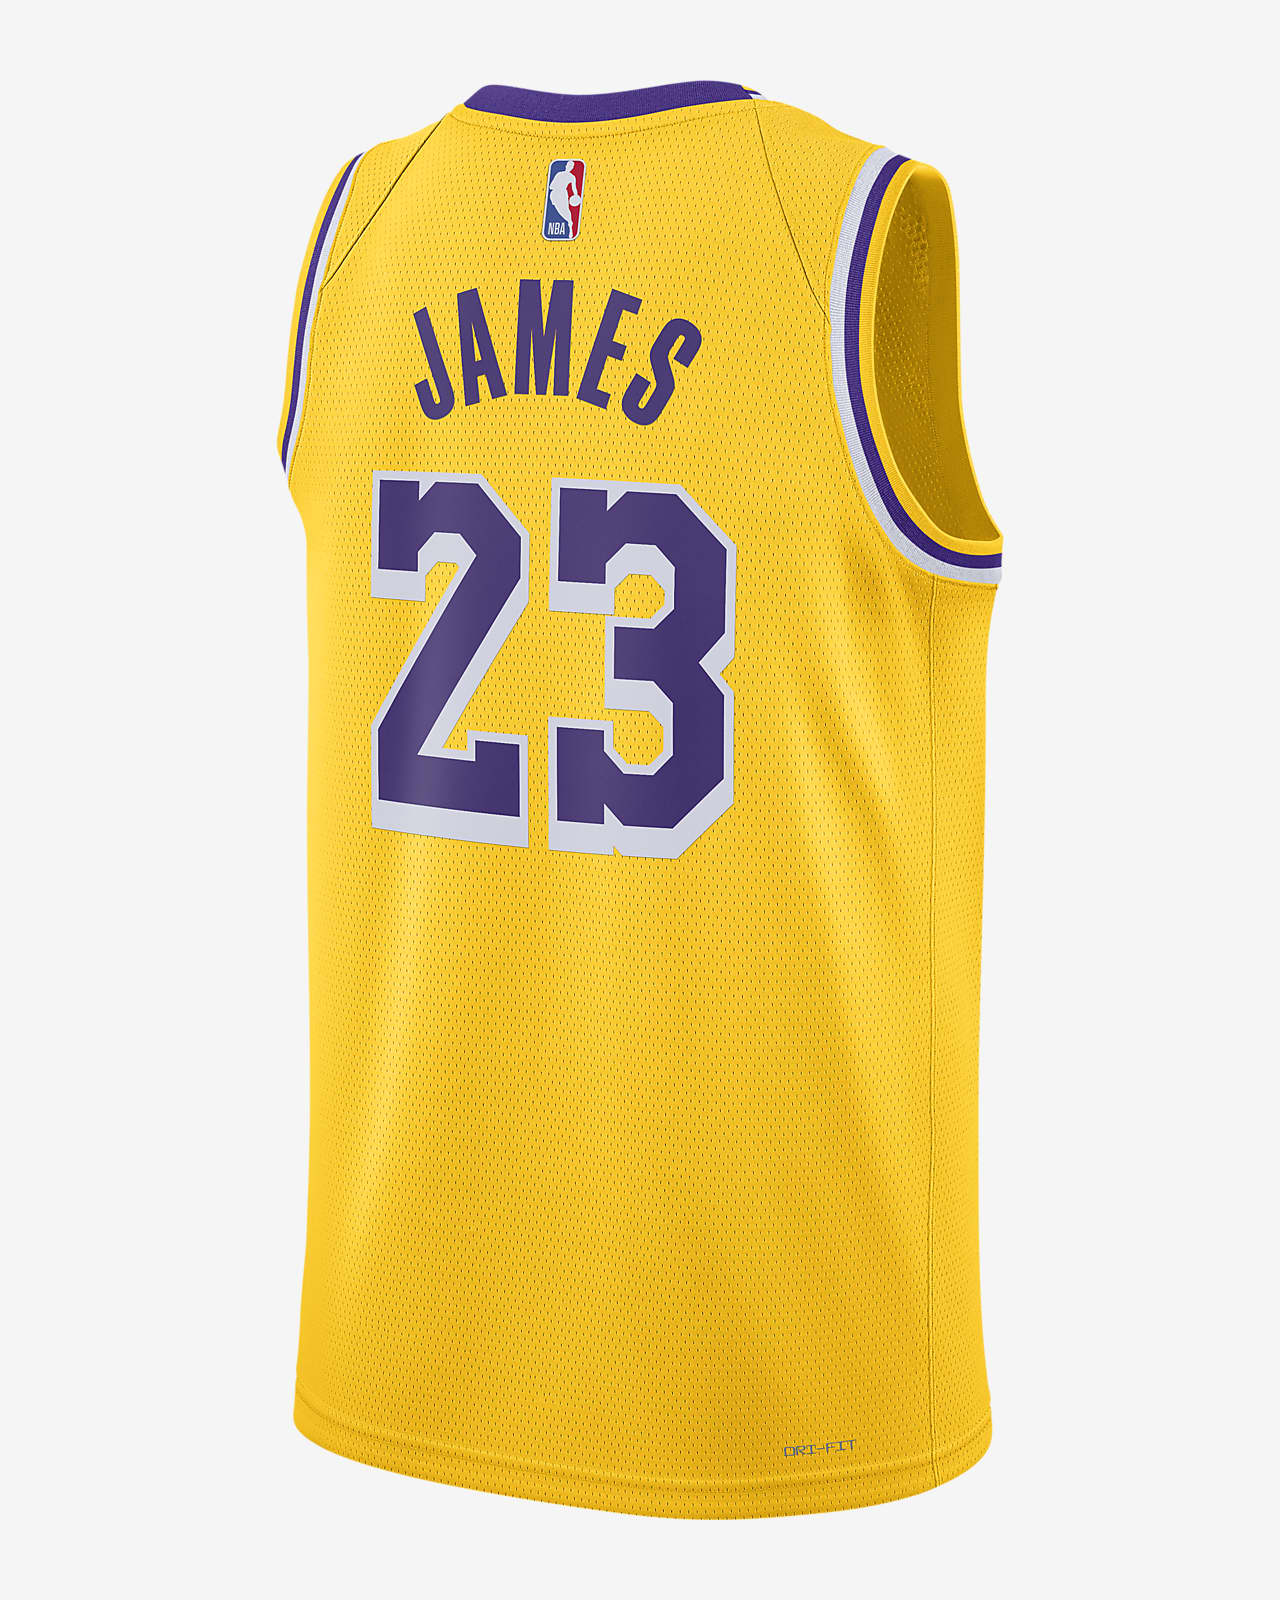 lakers jersey number 23